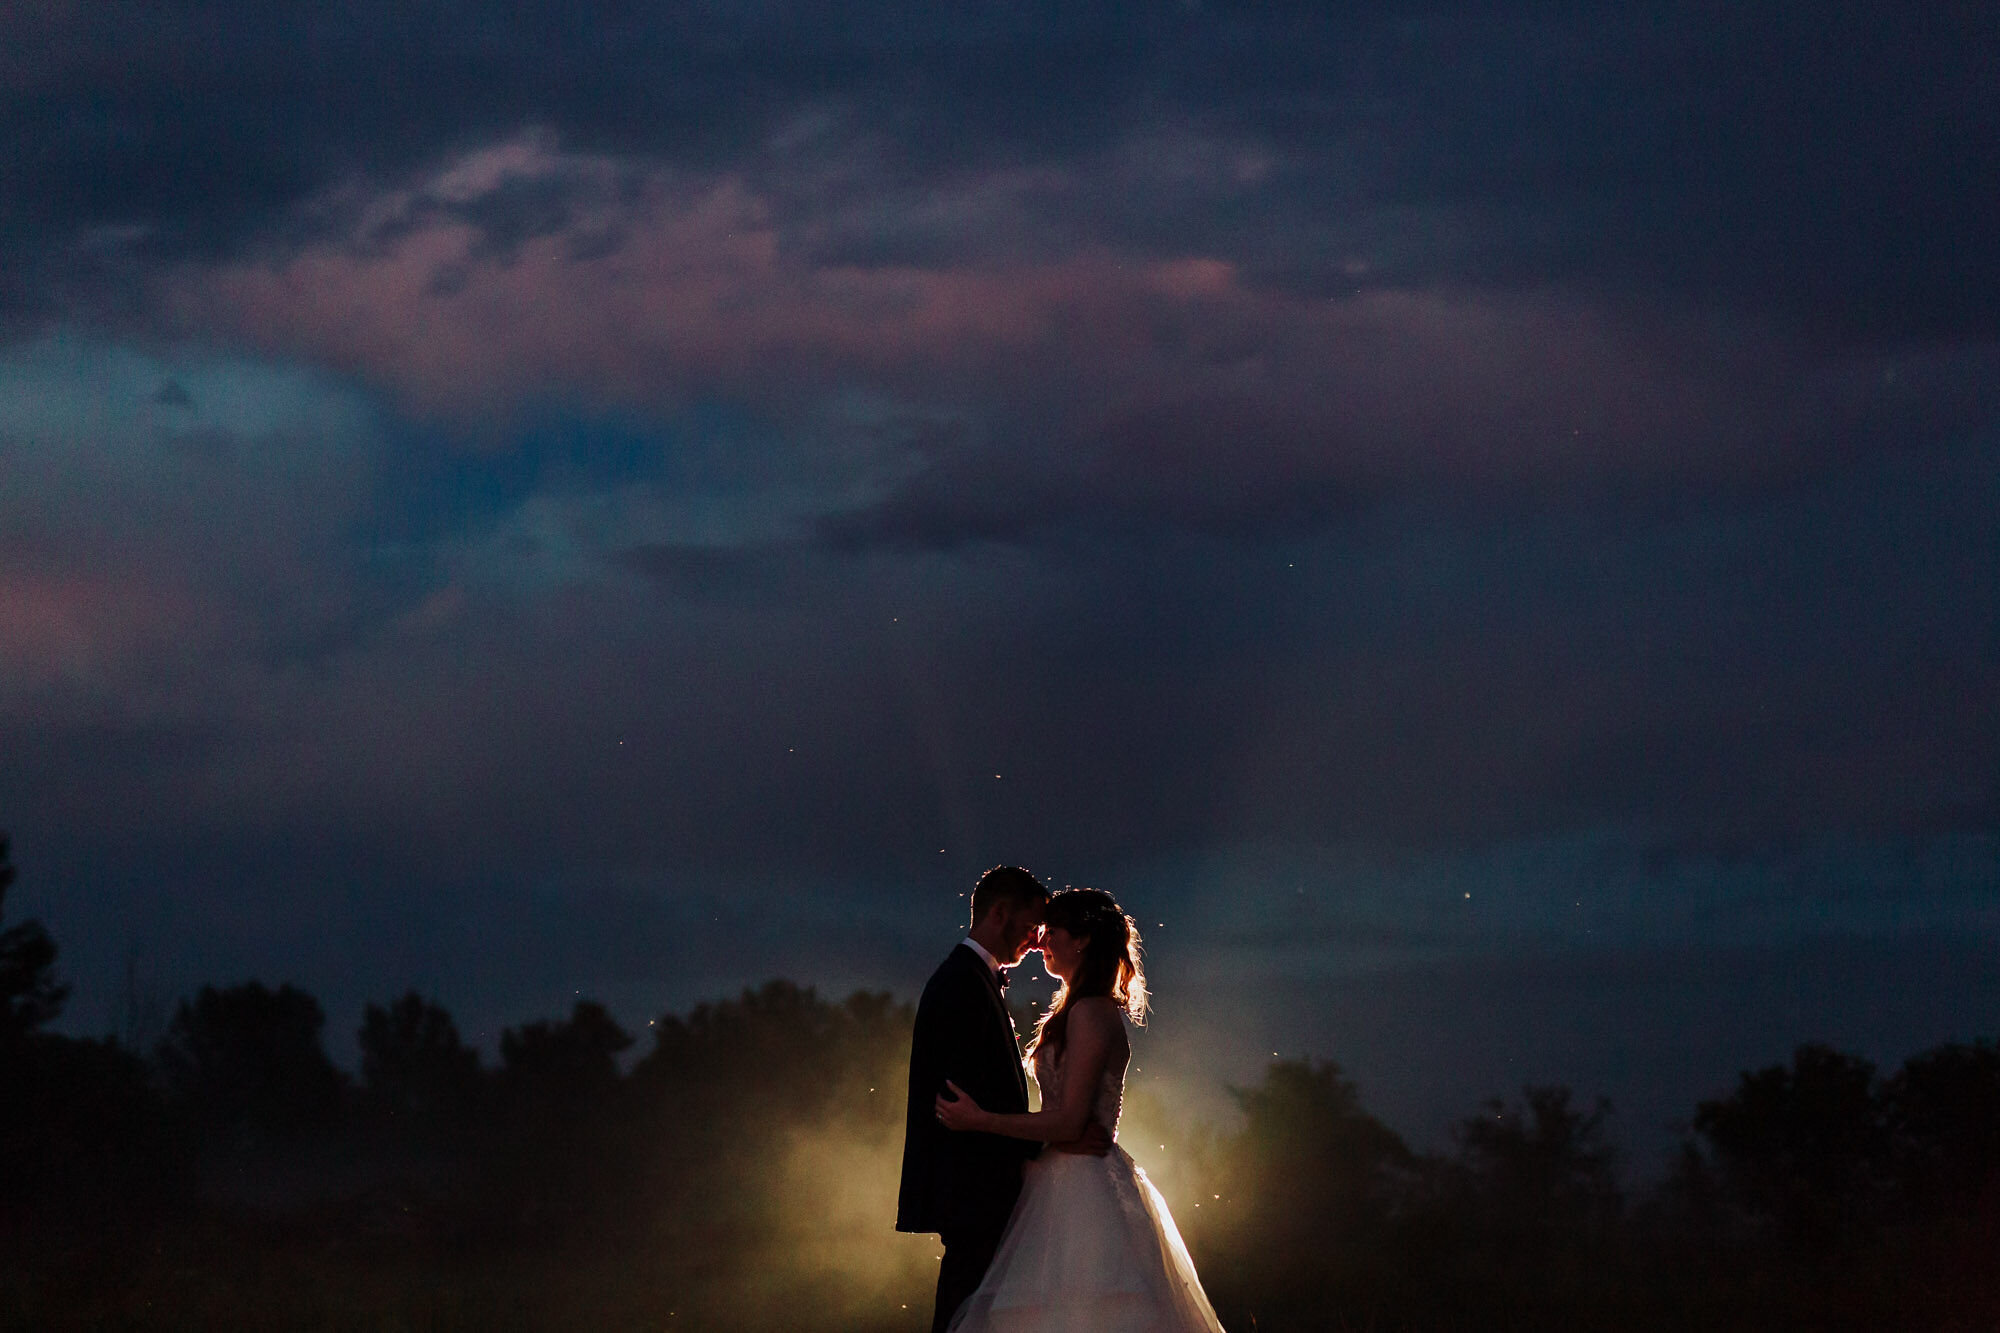 Posed portrait of bride and groom facing each other, backlit in front of a dramatic evening sky